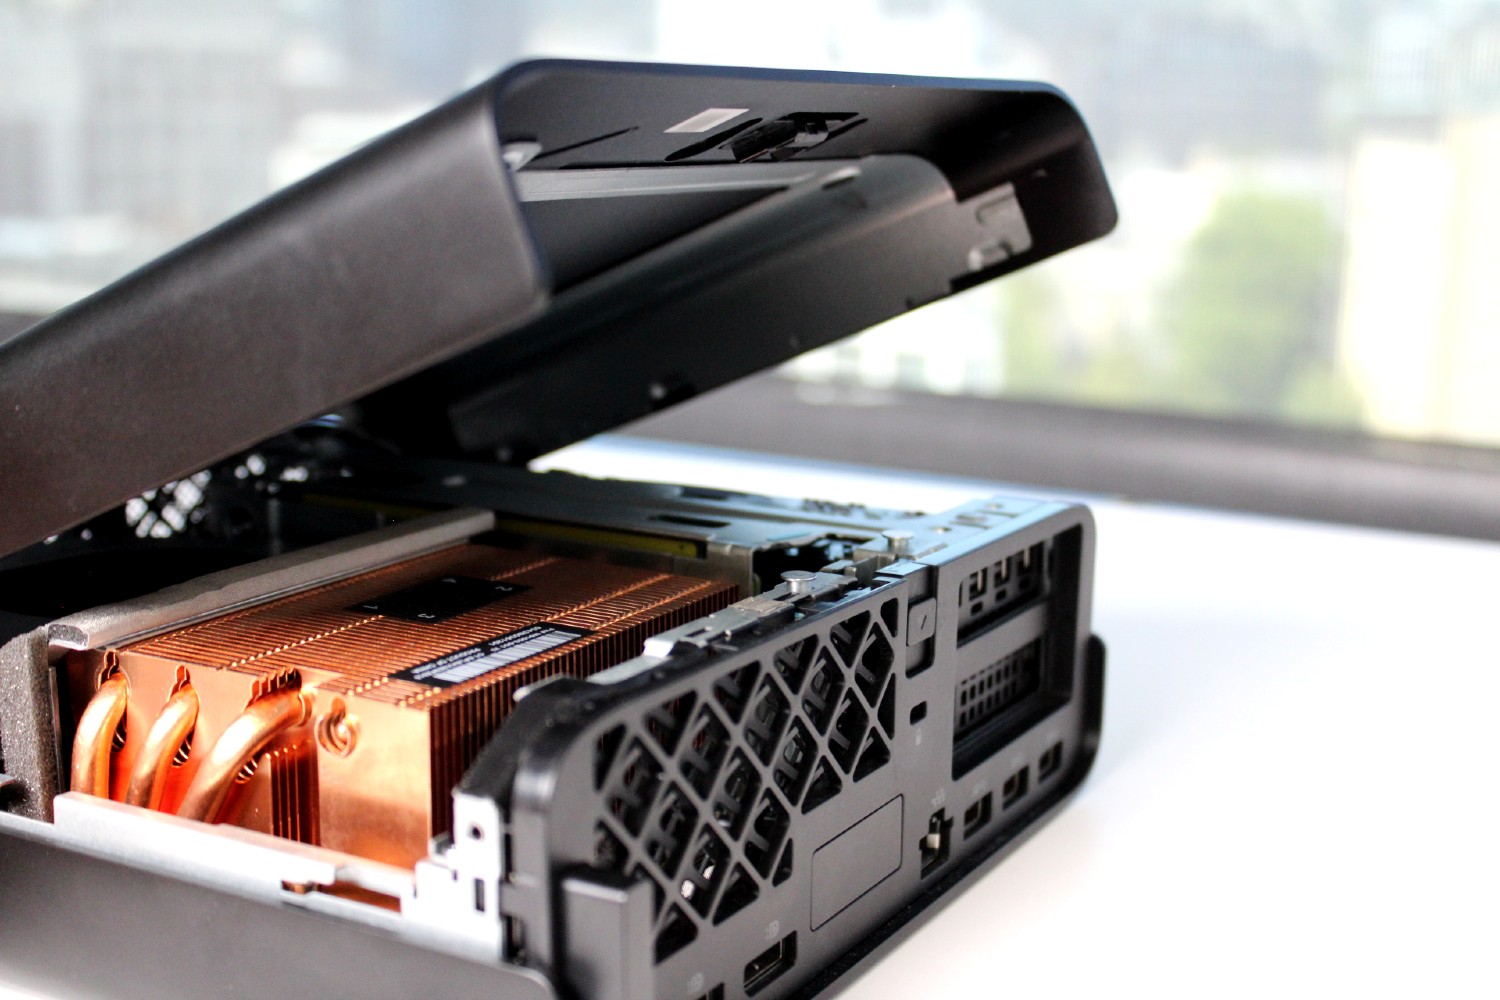 The HP Z2 G9 Workstation, opened up to reveal internals.